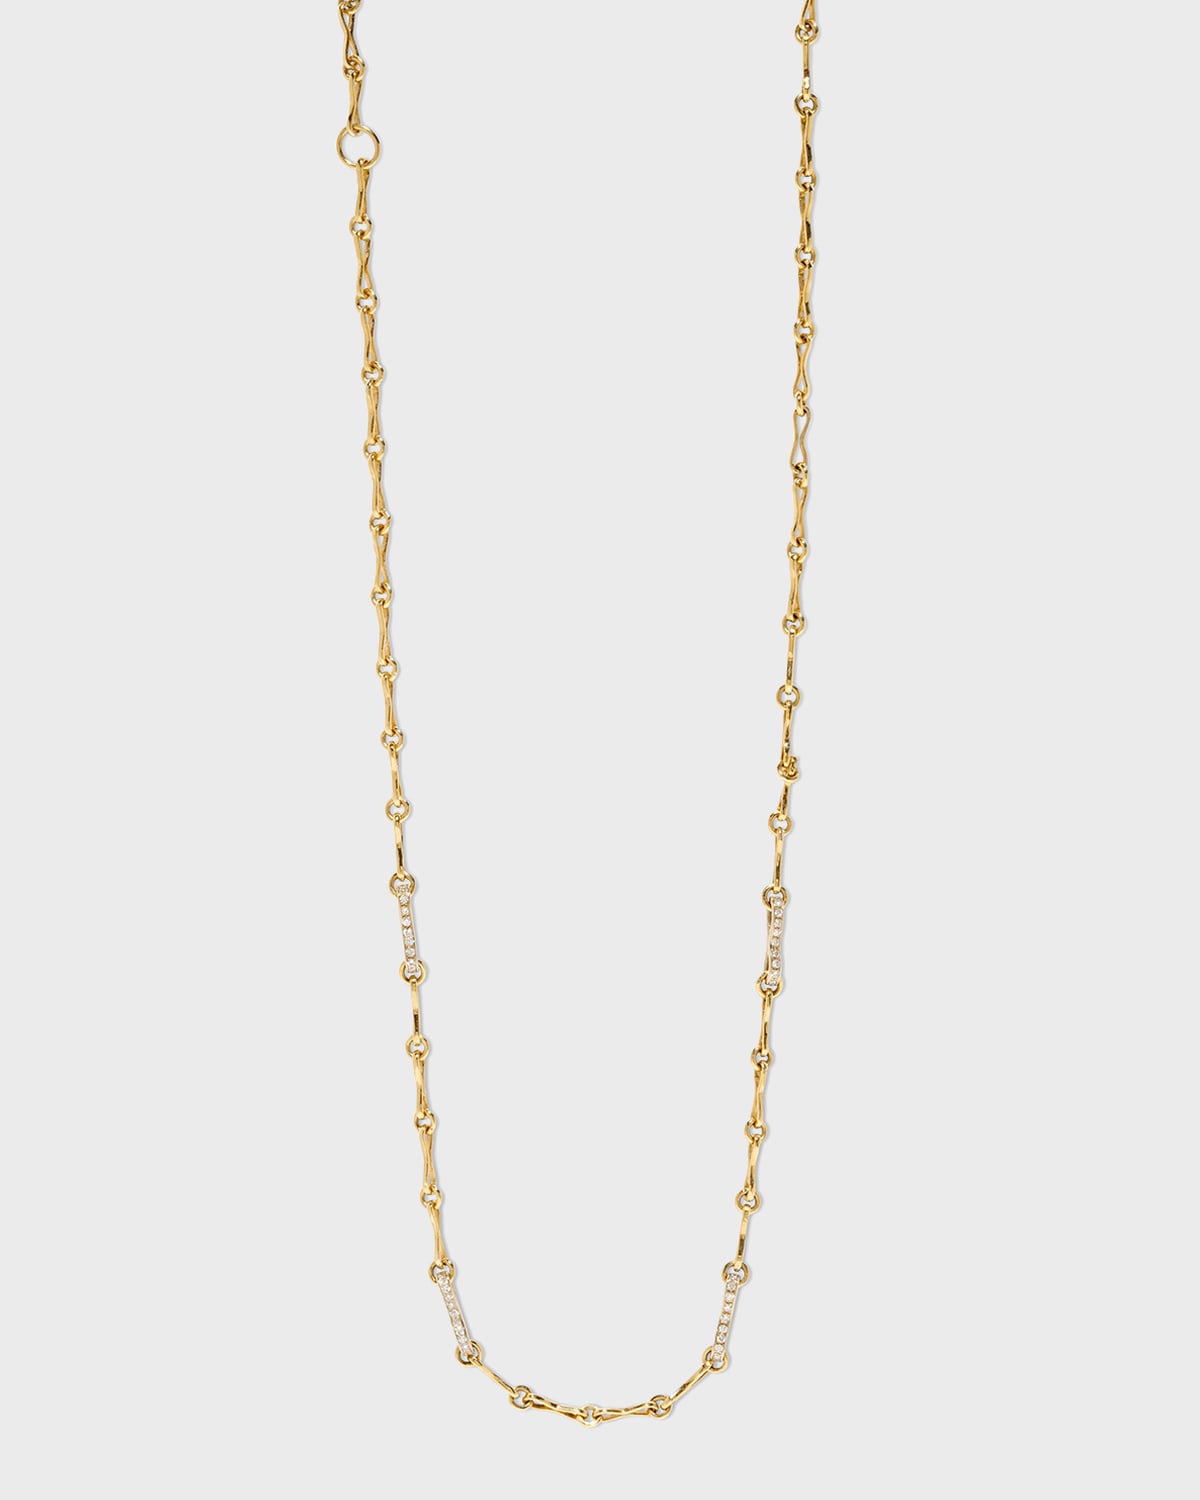 AZLEE Small Circle Chain with Pave Links